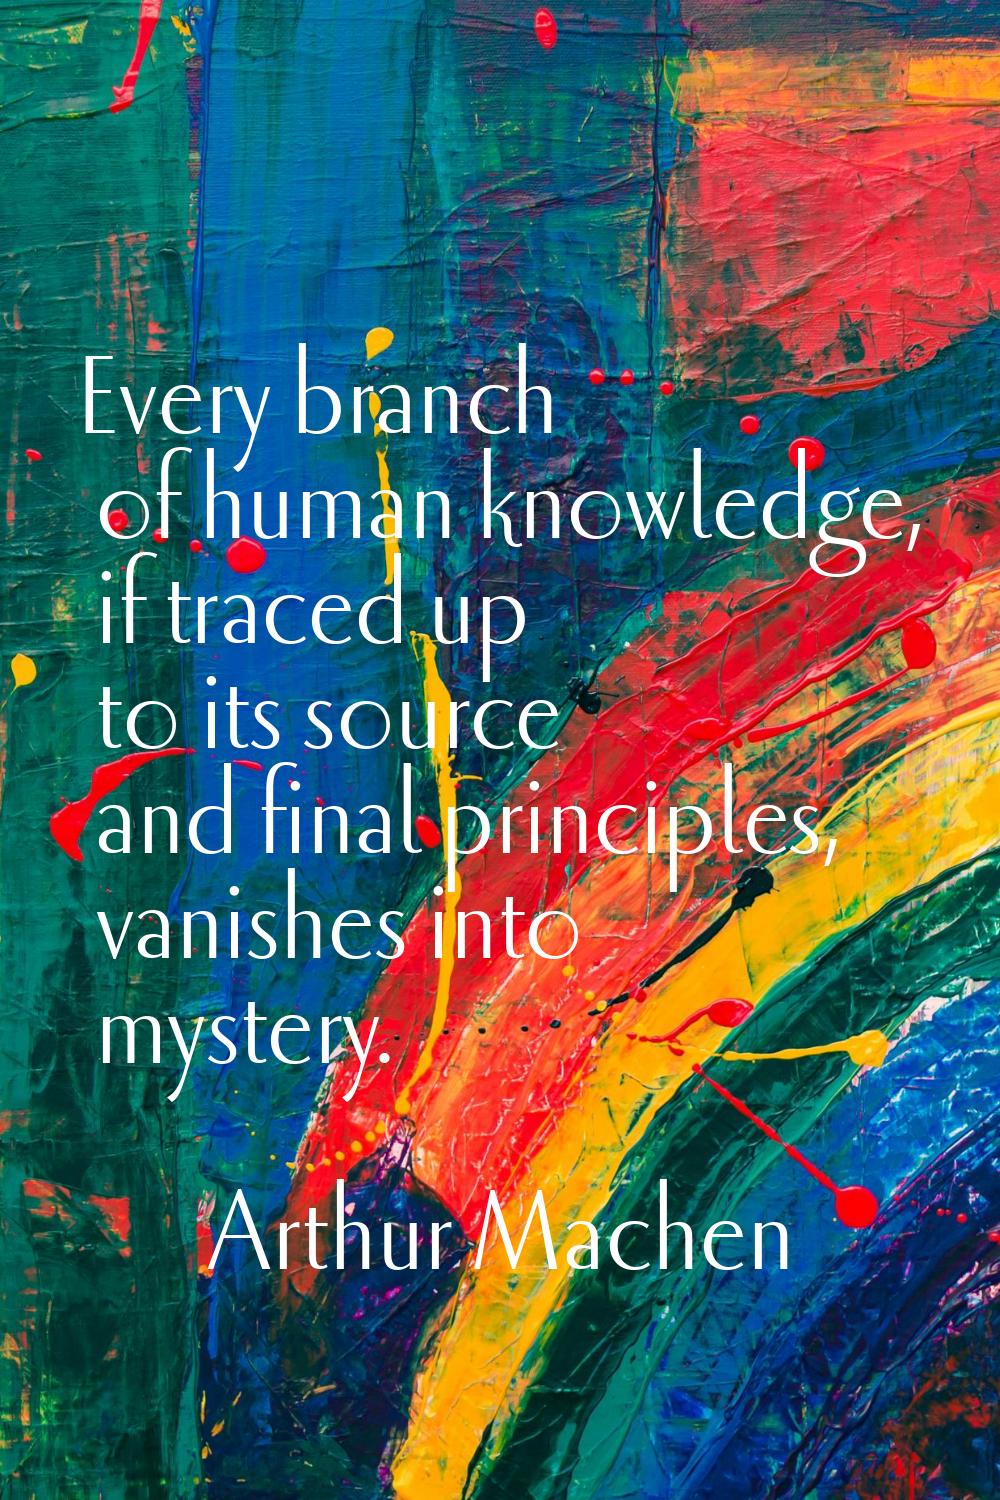 Every branch of human knowledge, if traced up to its source and final principles, vanishes into mys